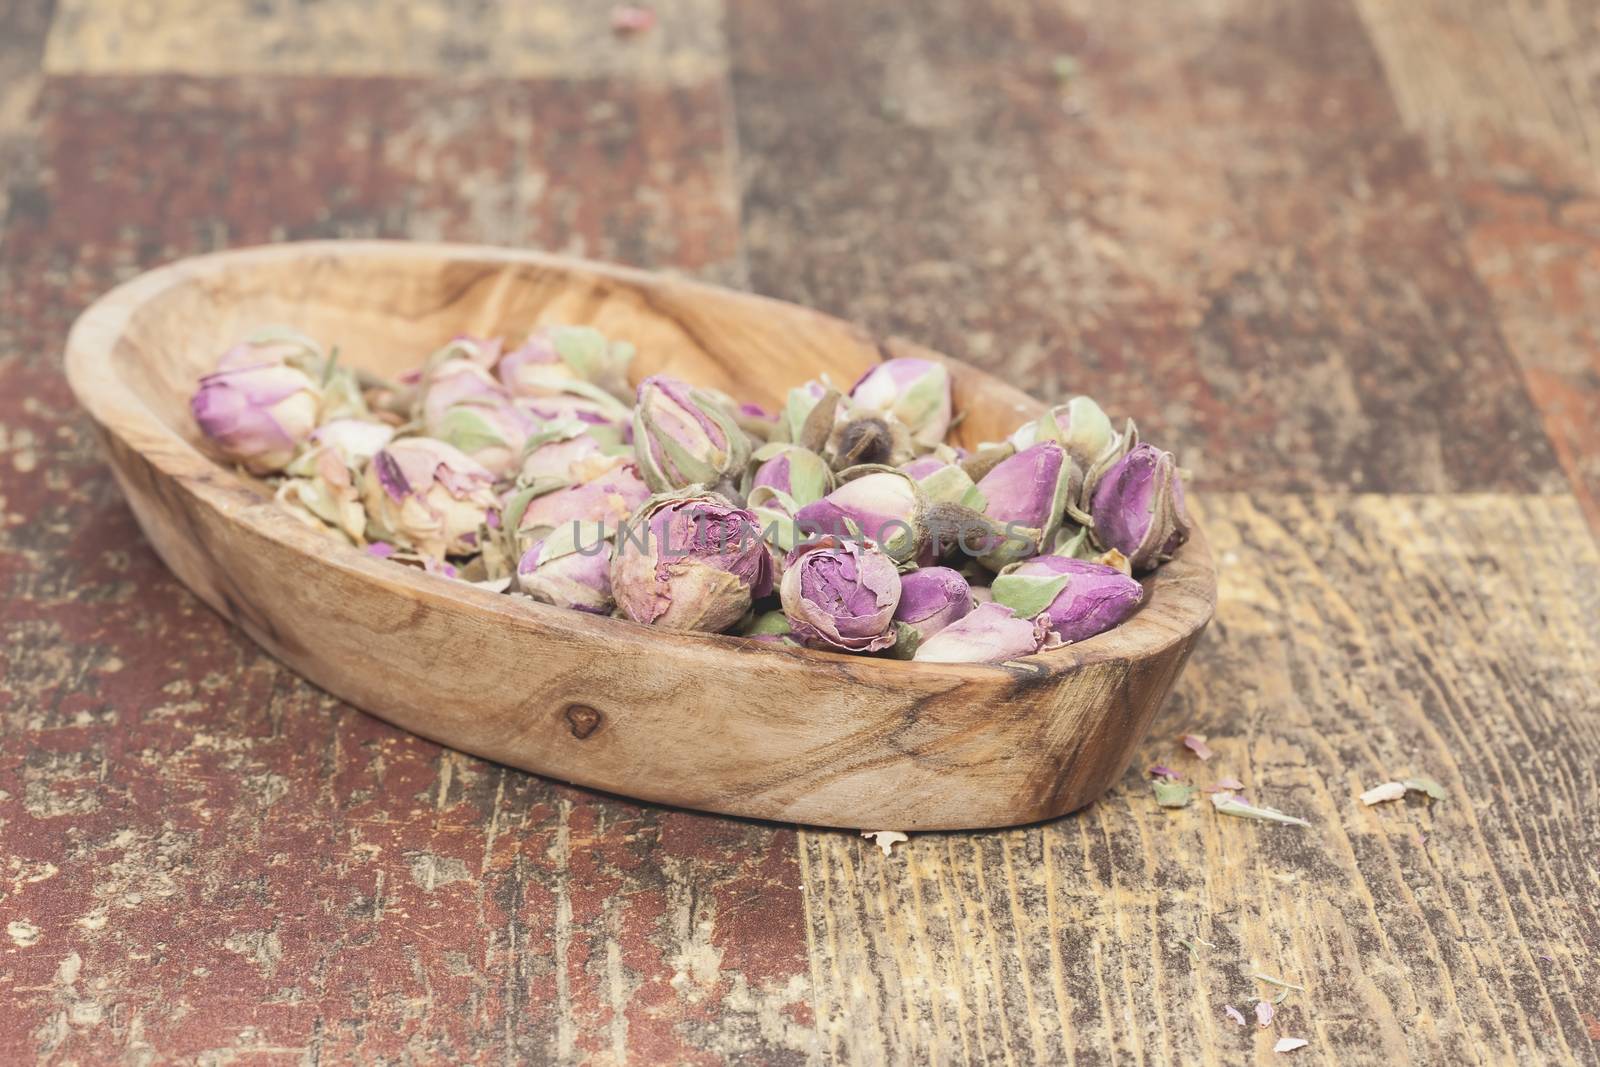 Pretty little edible violet rose buds, on old wooden table . Macro photograph with shallow depth of field. Done with a vintage retro filter